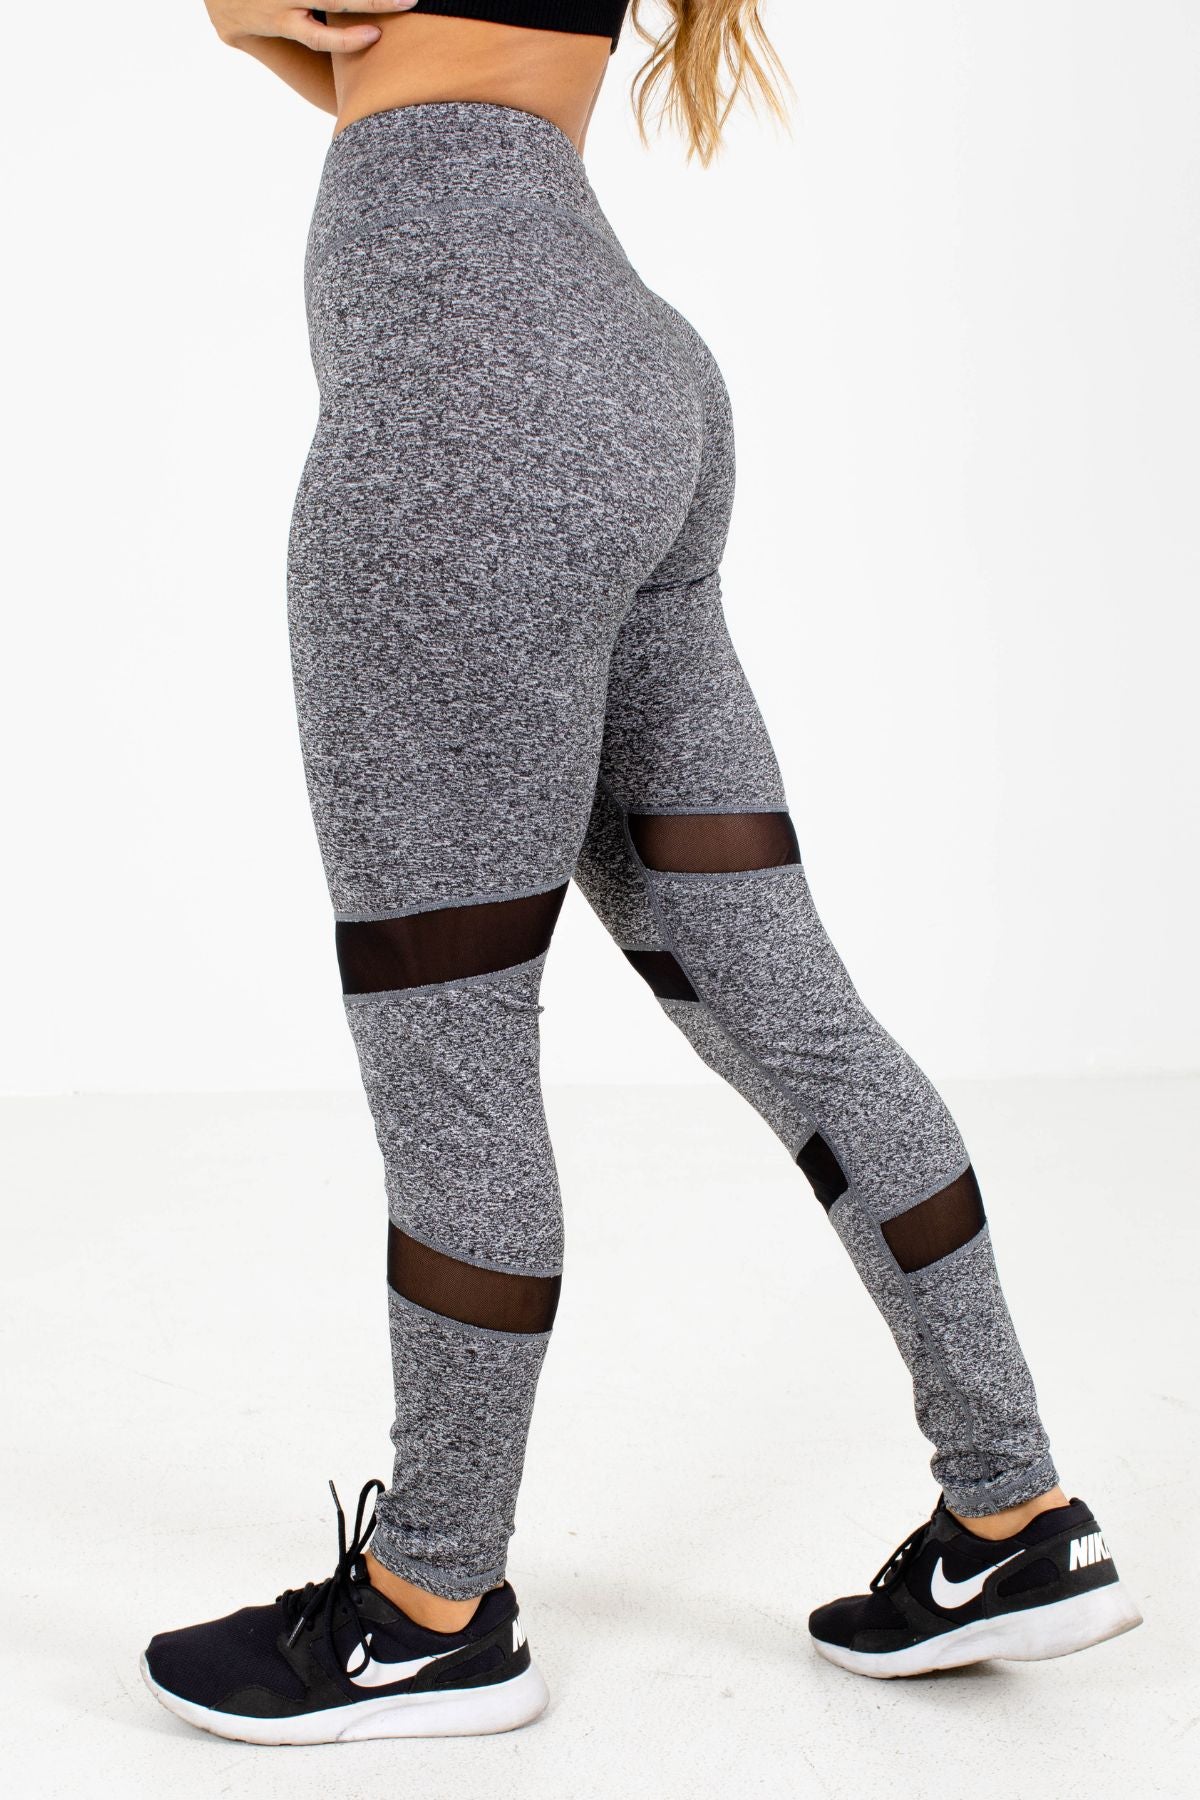 Gray High Quality Boutique Activewear Leggings for Women